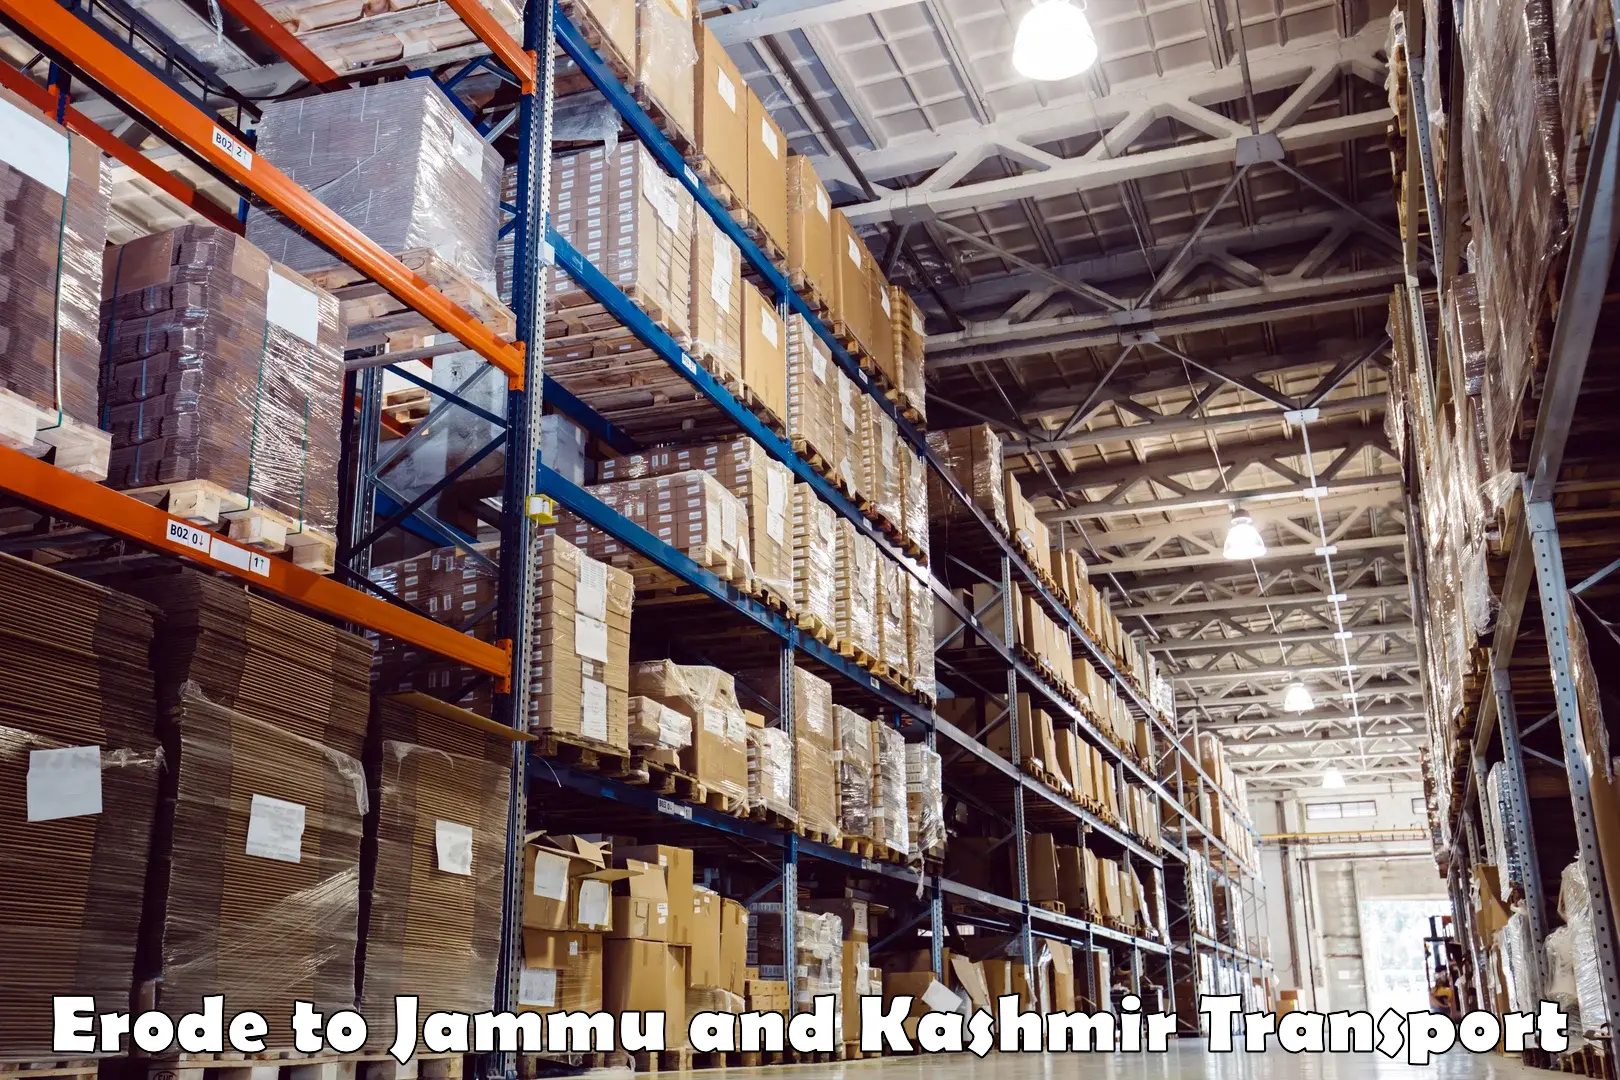 Delivery service Erode to Jammu and Kashmir